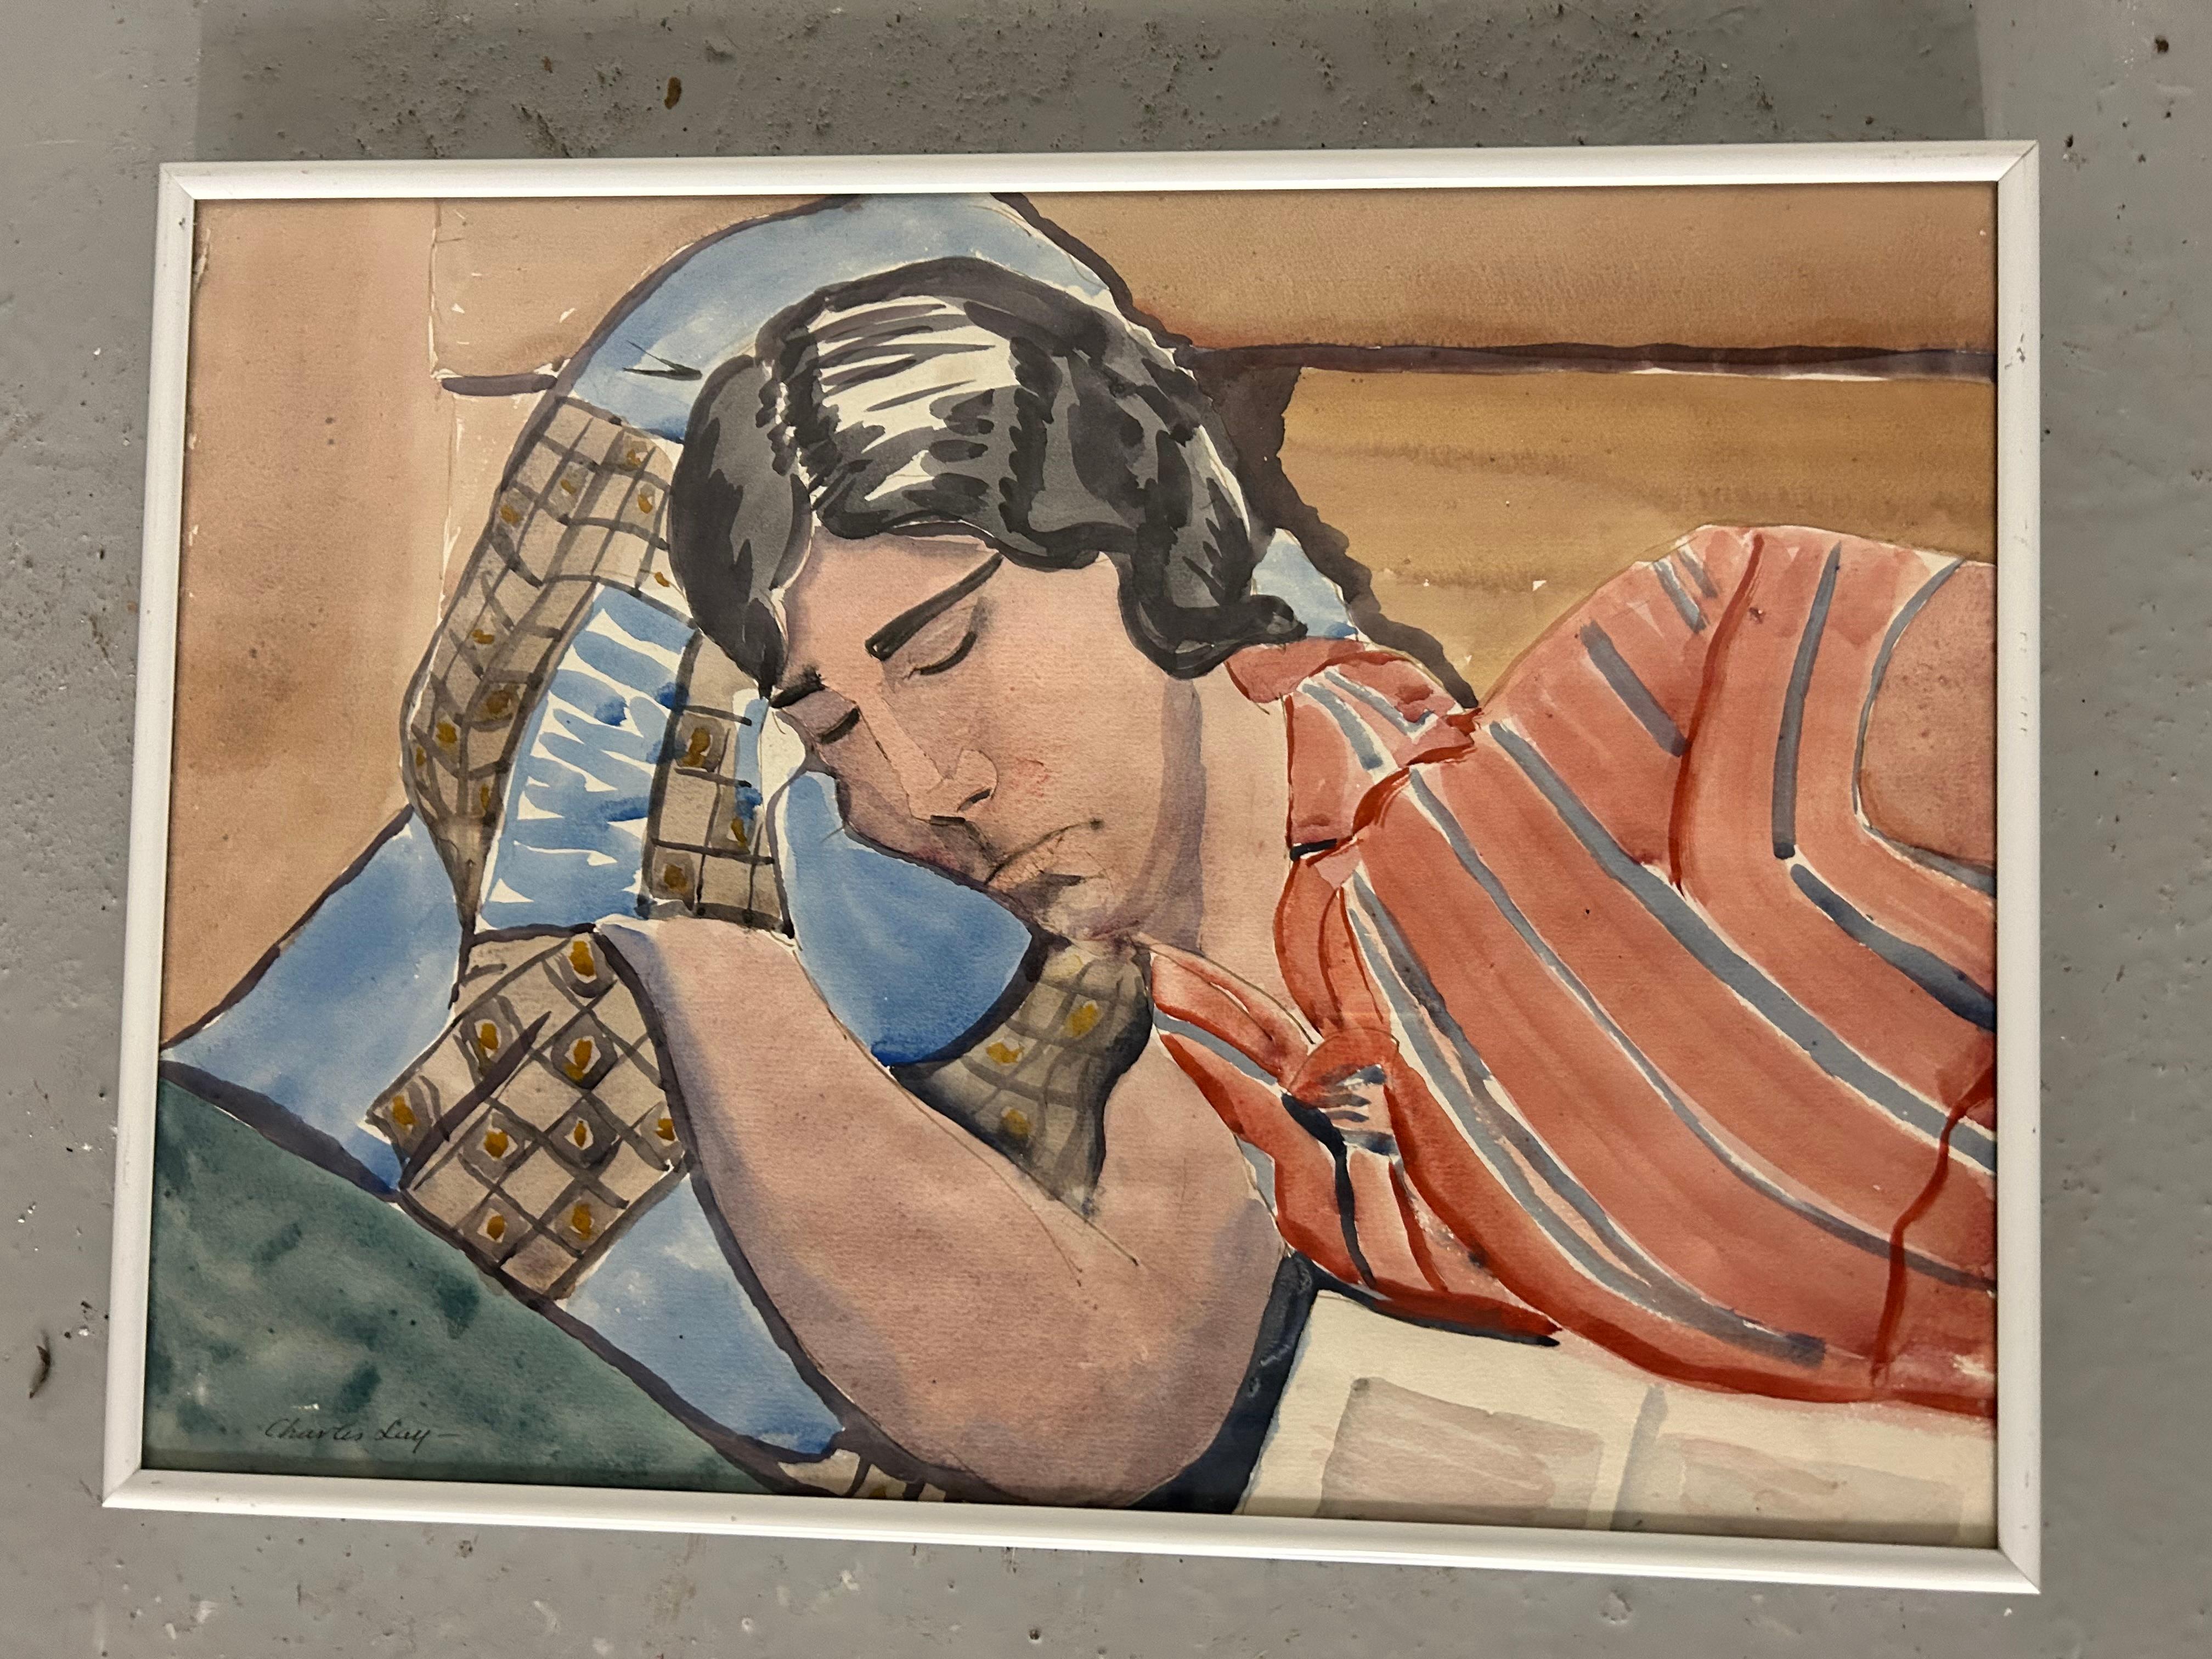 Watercolor on paper of woman with finger curled hair napping by Charles Downing Lay, signed Charles Lay. Circa 1925. Silver metal frame has a few small marks on edges. Charles Lay was a prominent American landscape architect whose major projects